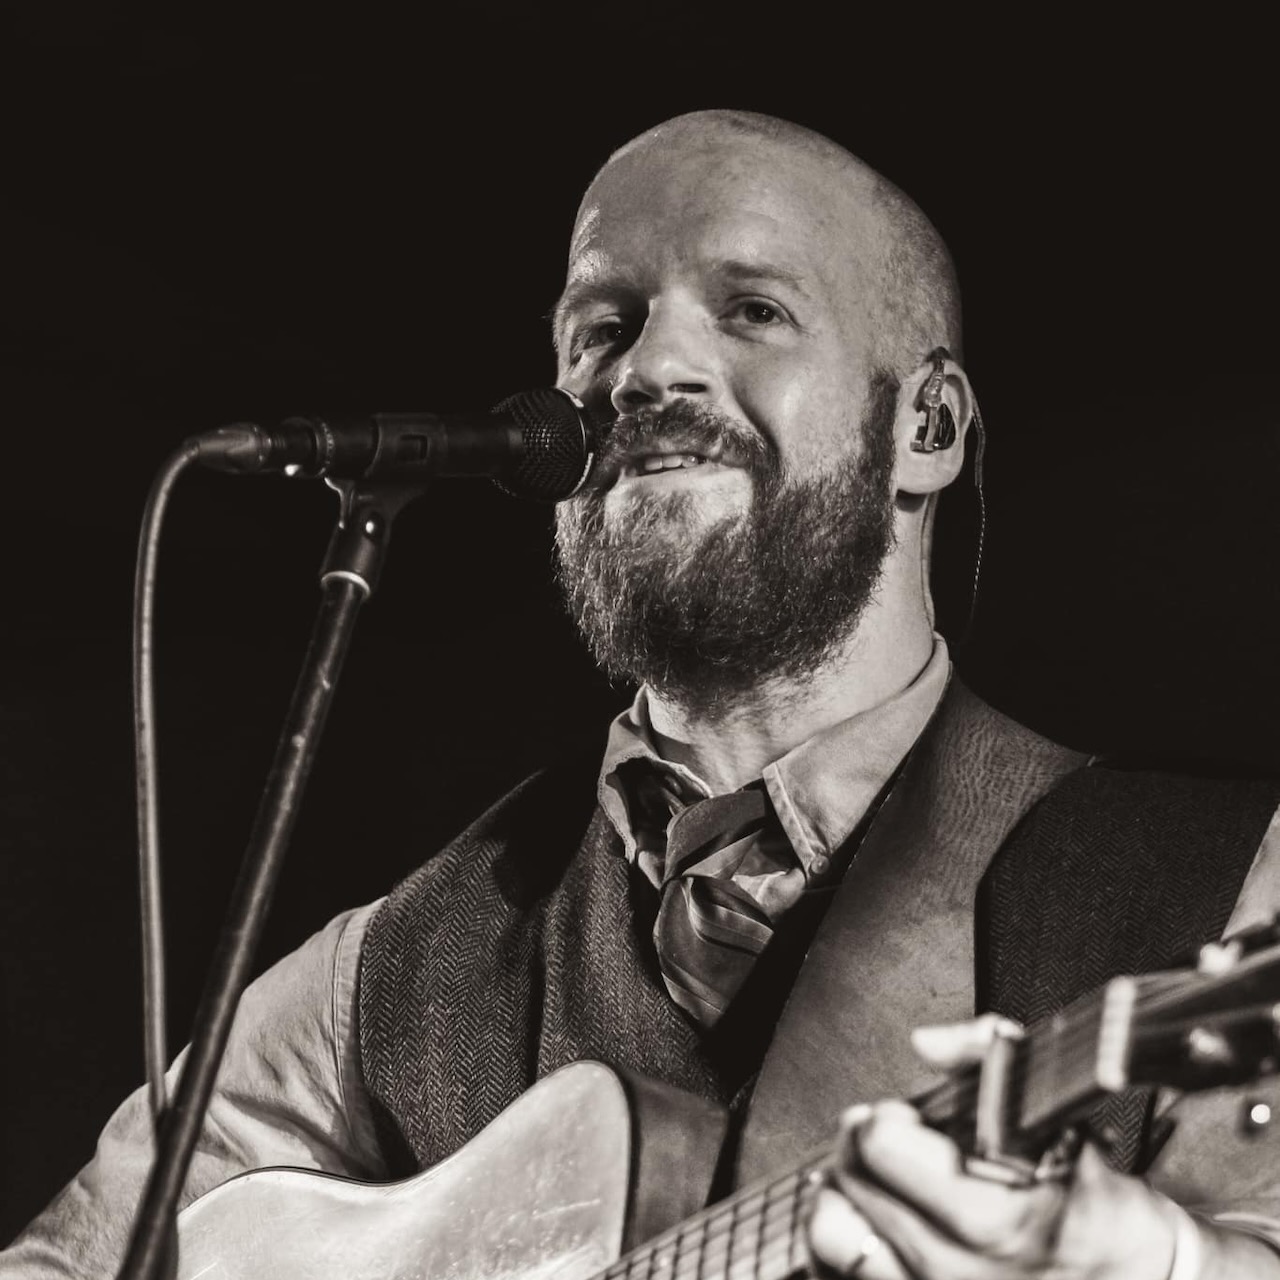 LISTEN: Andy Ferrell, 'Another New Year's Eve'